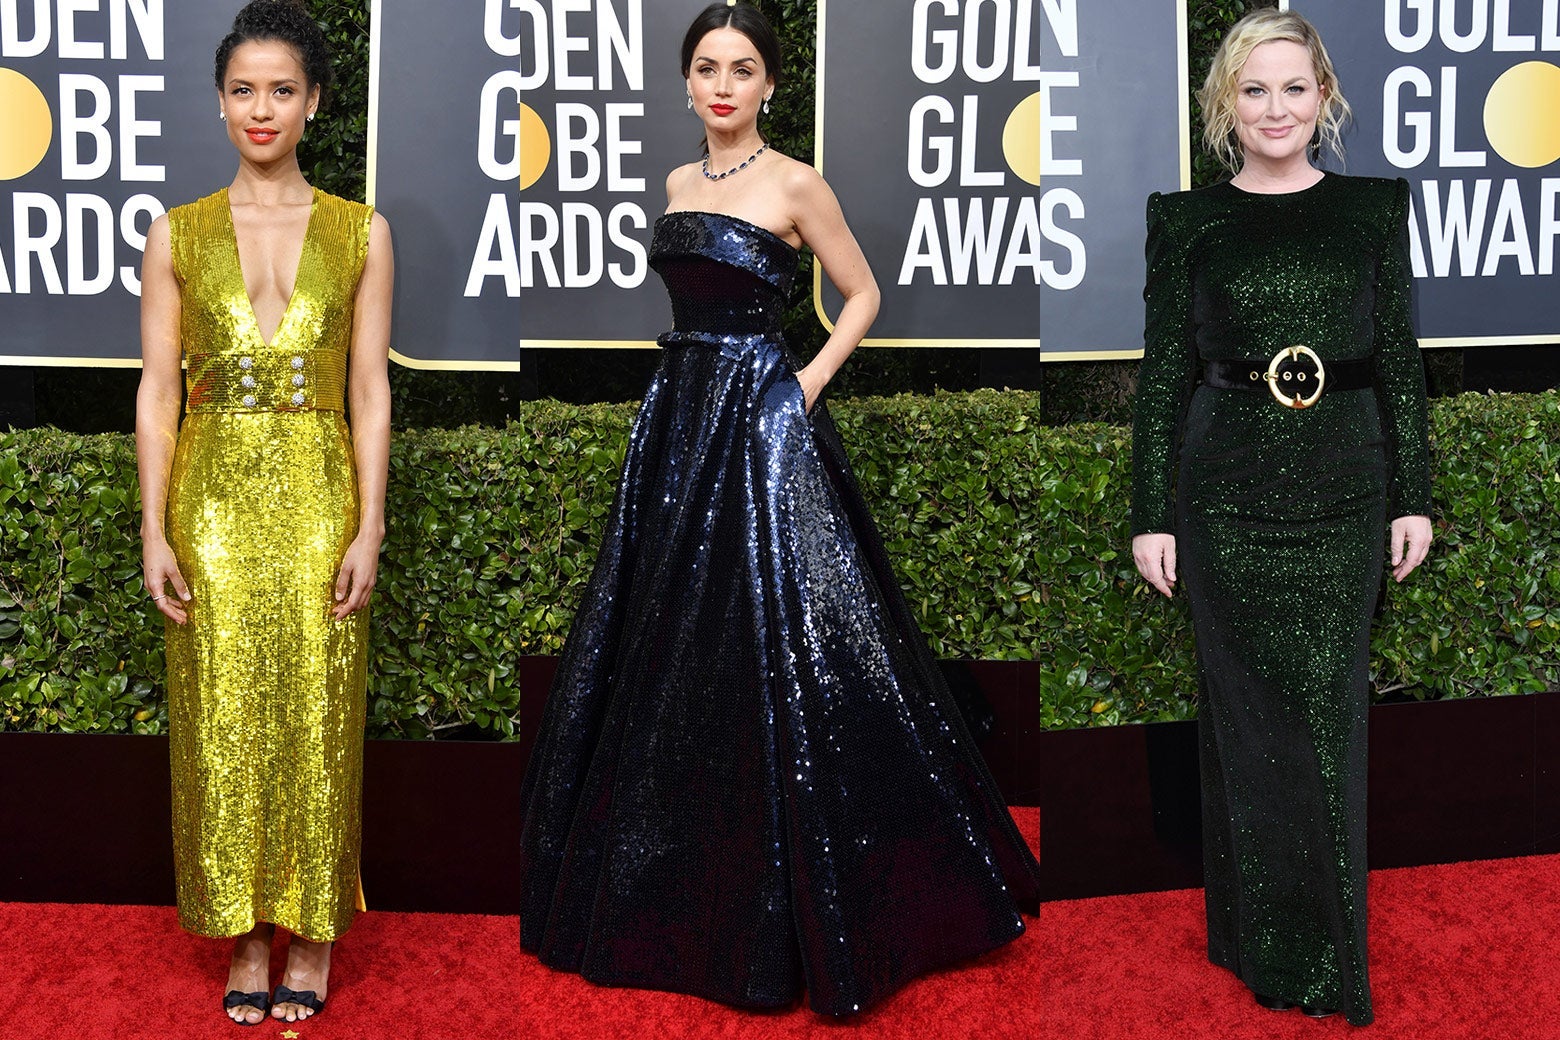 Gugu Mbatha-Raw, Ana de Armas, and Amy Poehler pose on the 2020 Golden Globes red carpet.